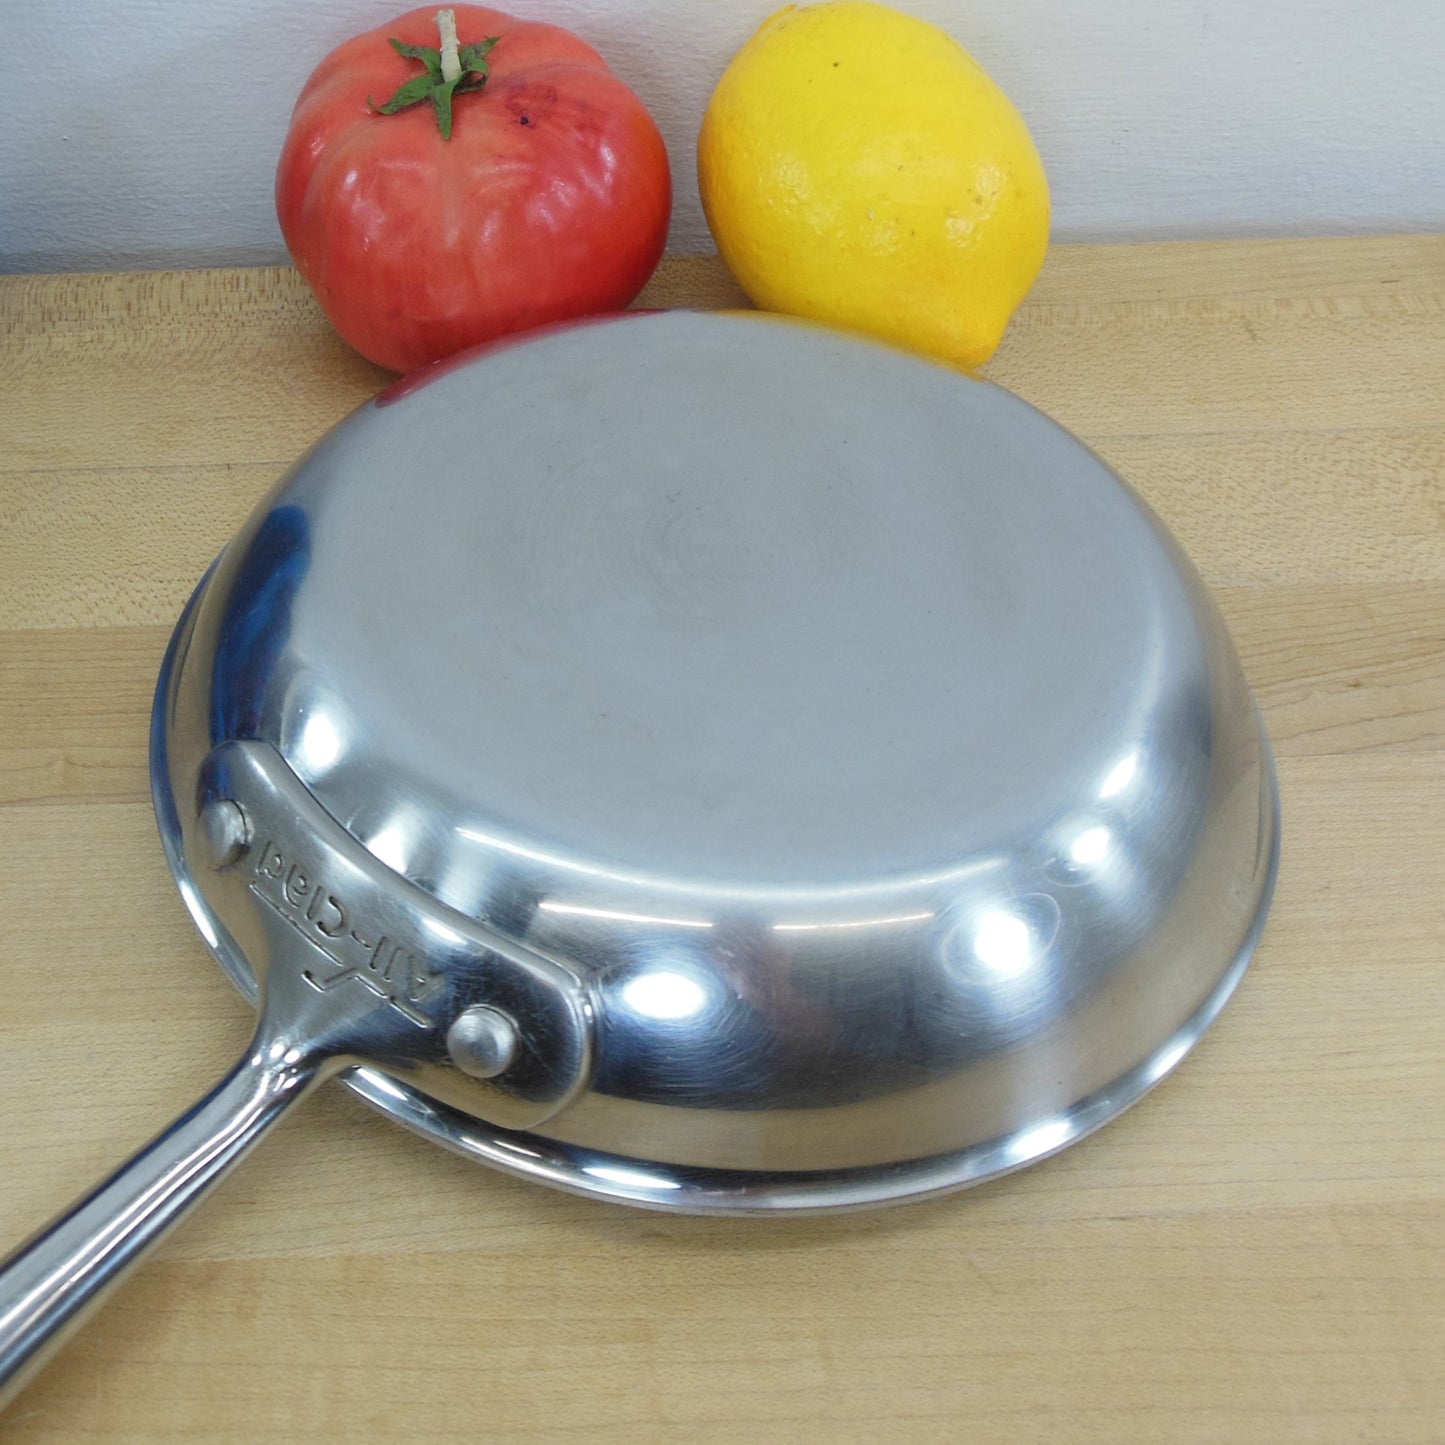 All-Clad USA Stainless Tri-Ply 7.5" Fry Pan Skillet used